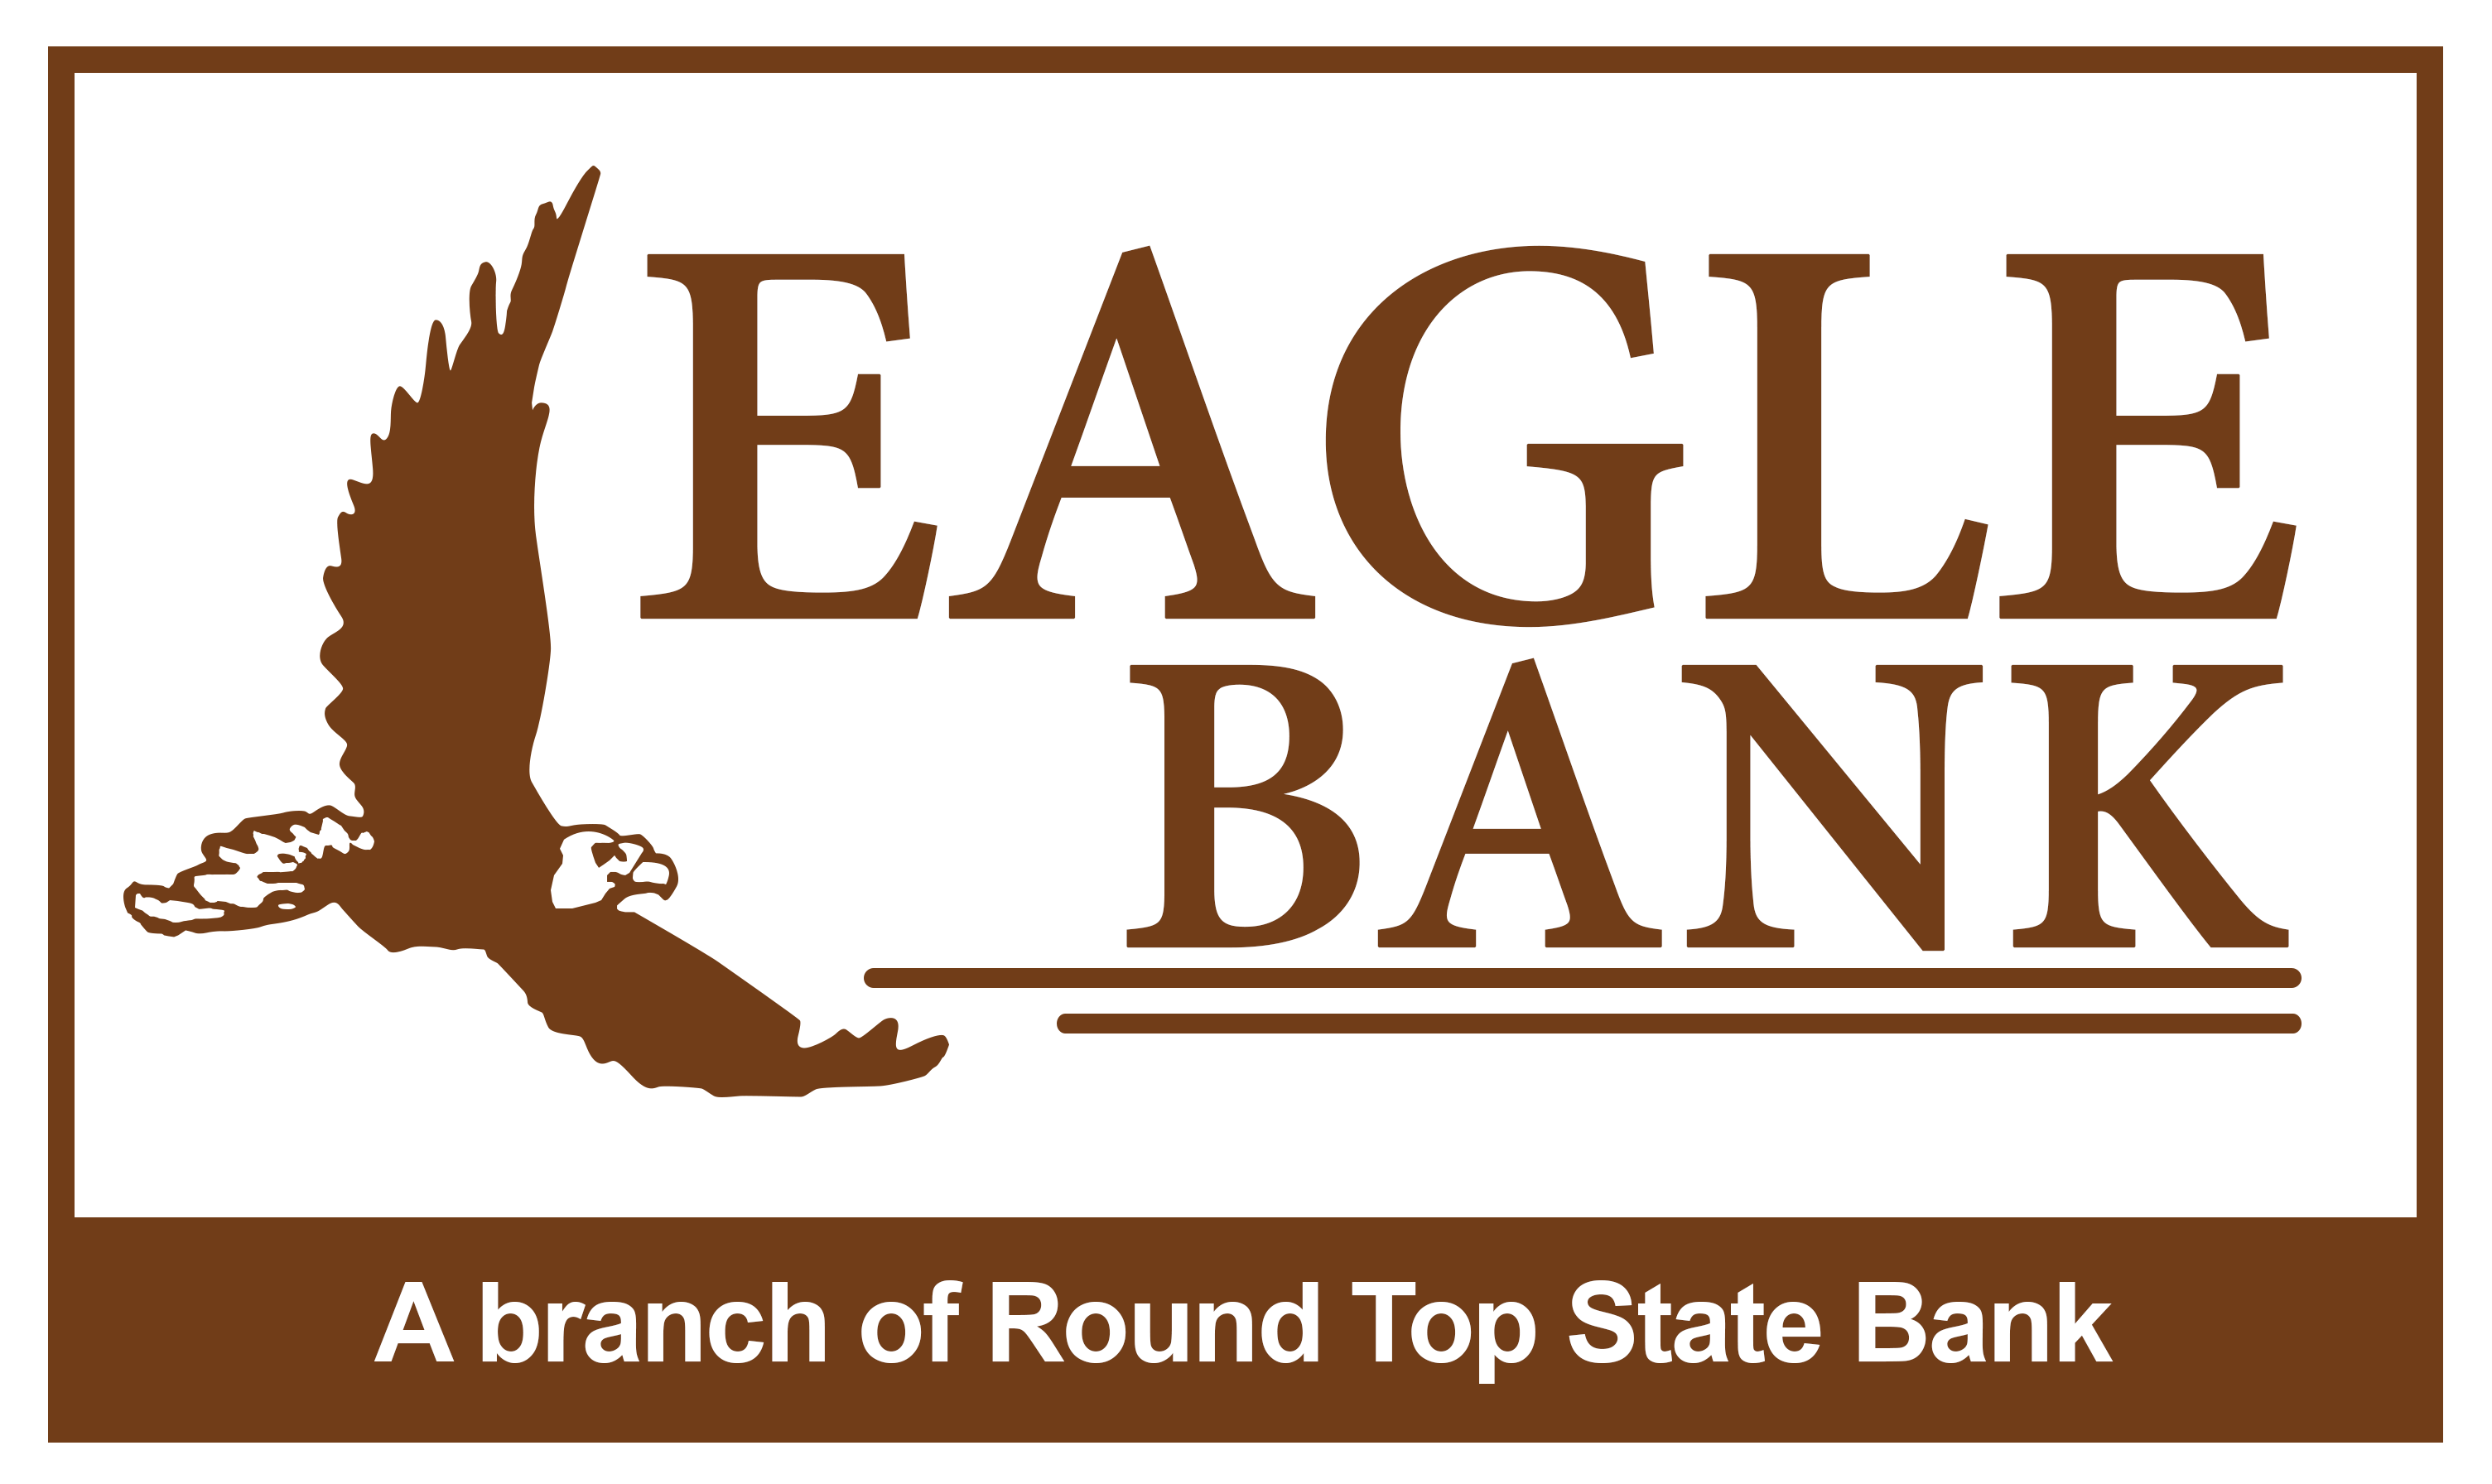 Eagle Bank Logo - Eagle Bank, a branch of Round Top State Bank